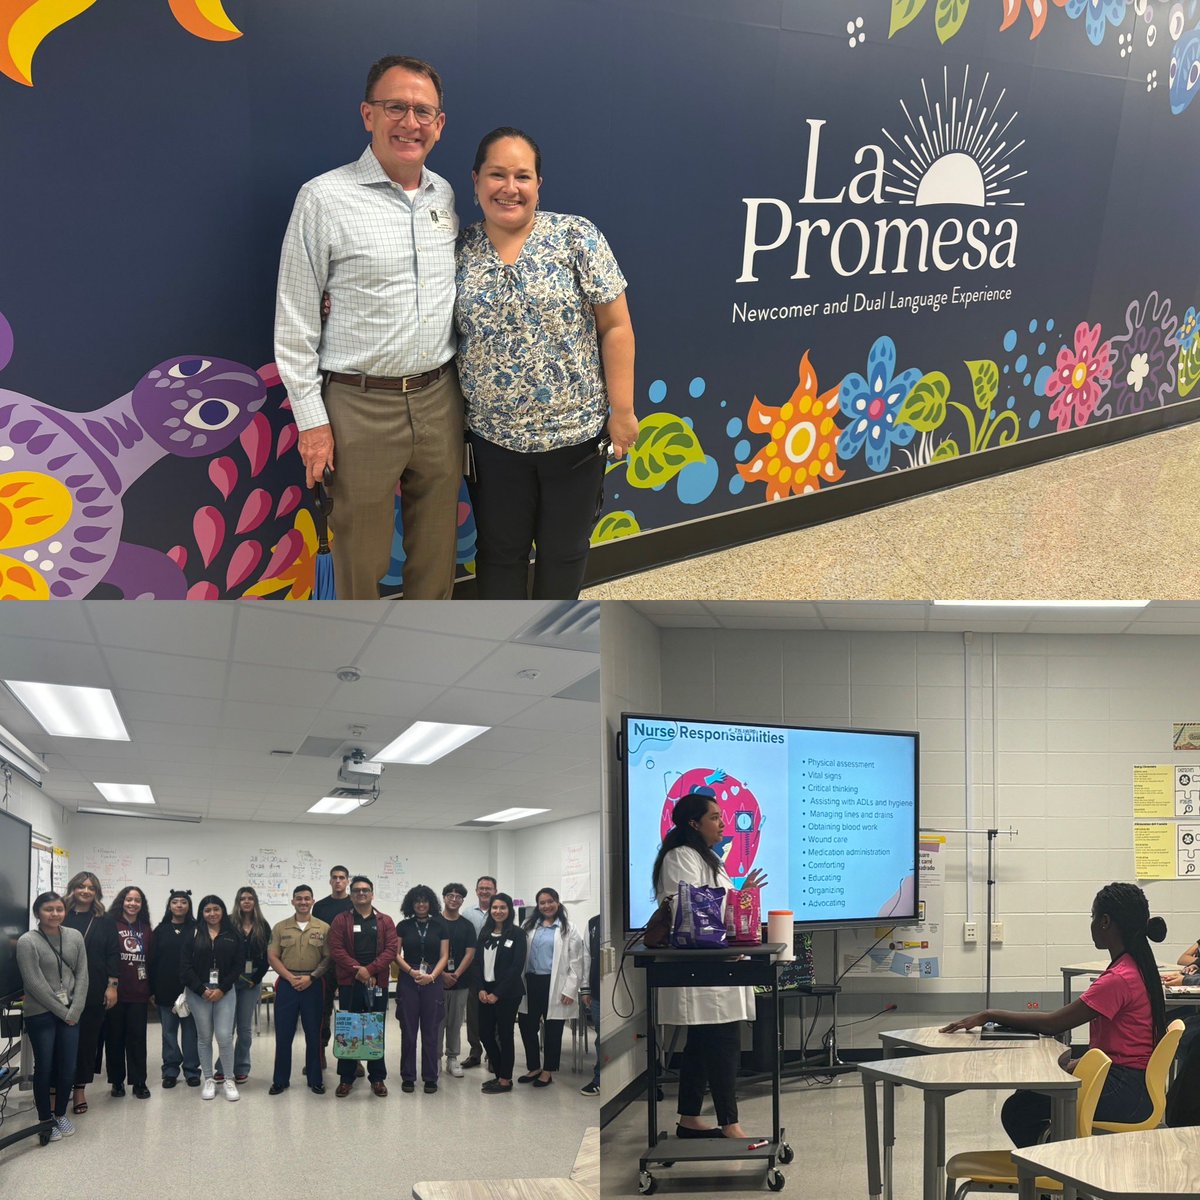 Today students @LaPromesa_AISD got to learn about different careers they could choose. I was happy to have my mentor @leadlearnerRS talk to students about education.